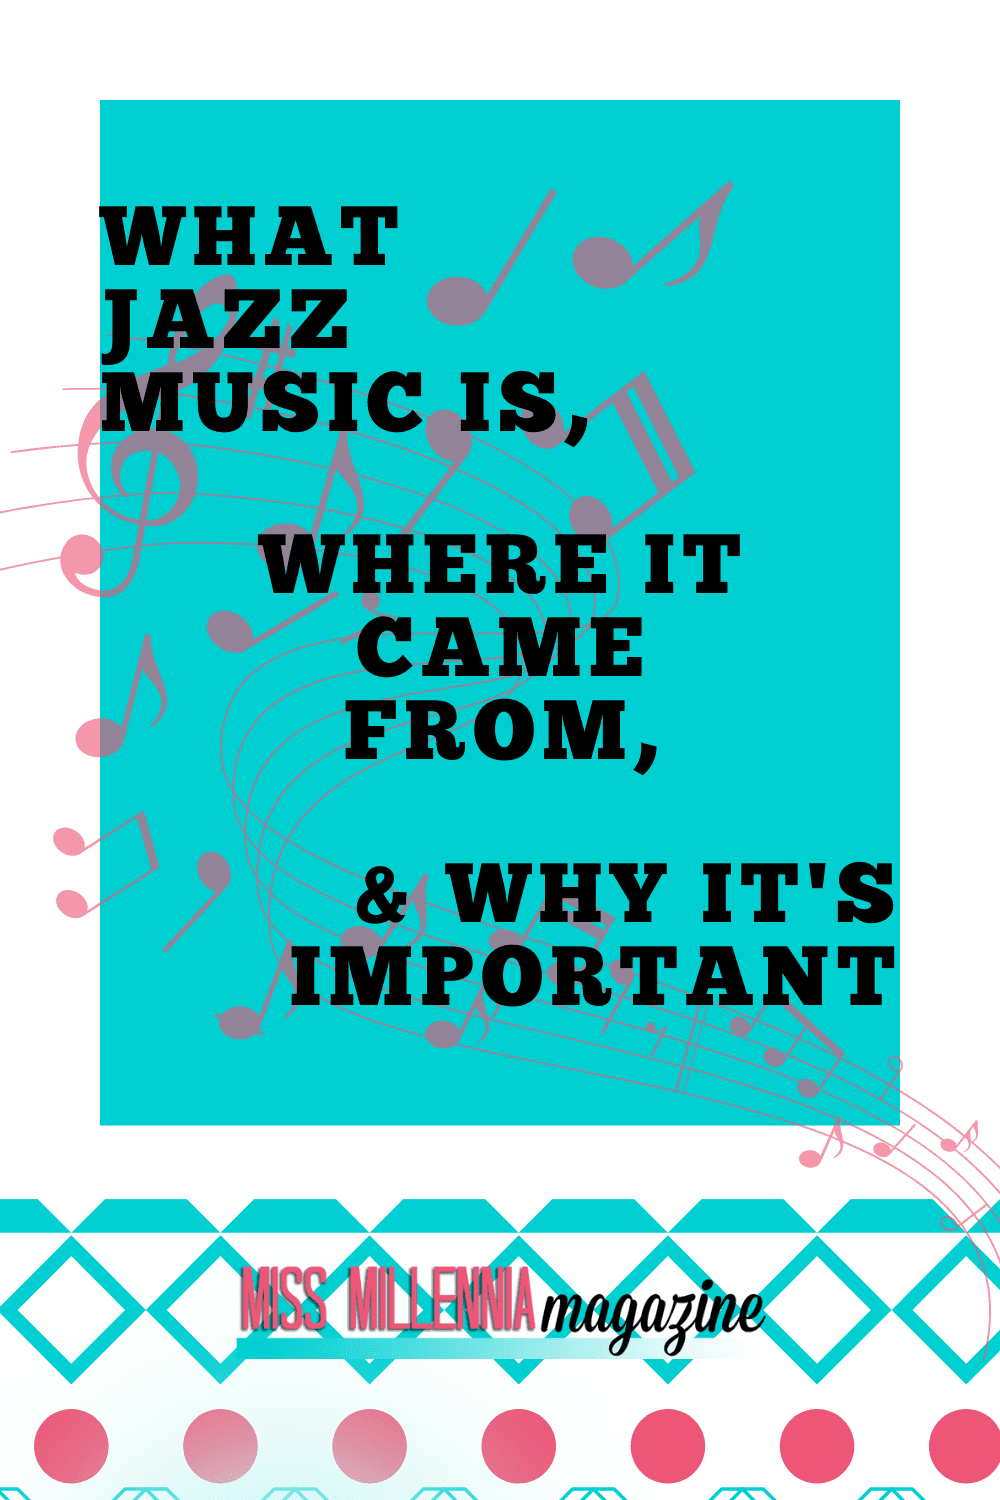 What Jazz Music Is, Where It Came From, & Why It’s Important